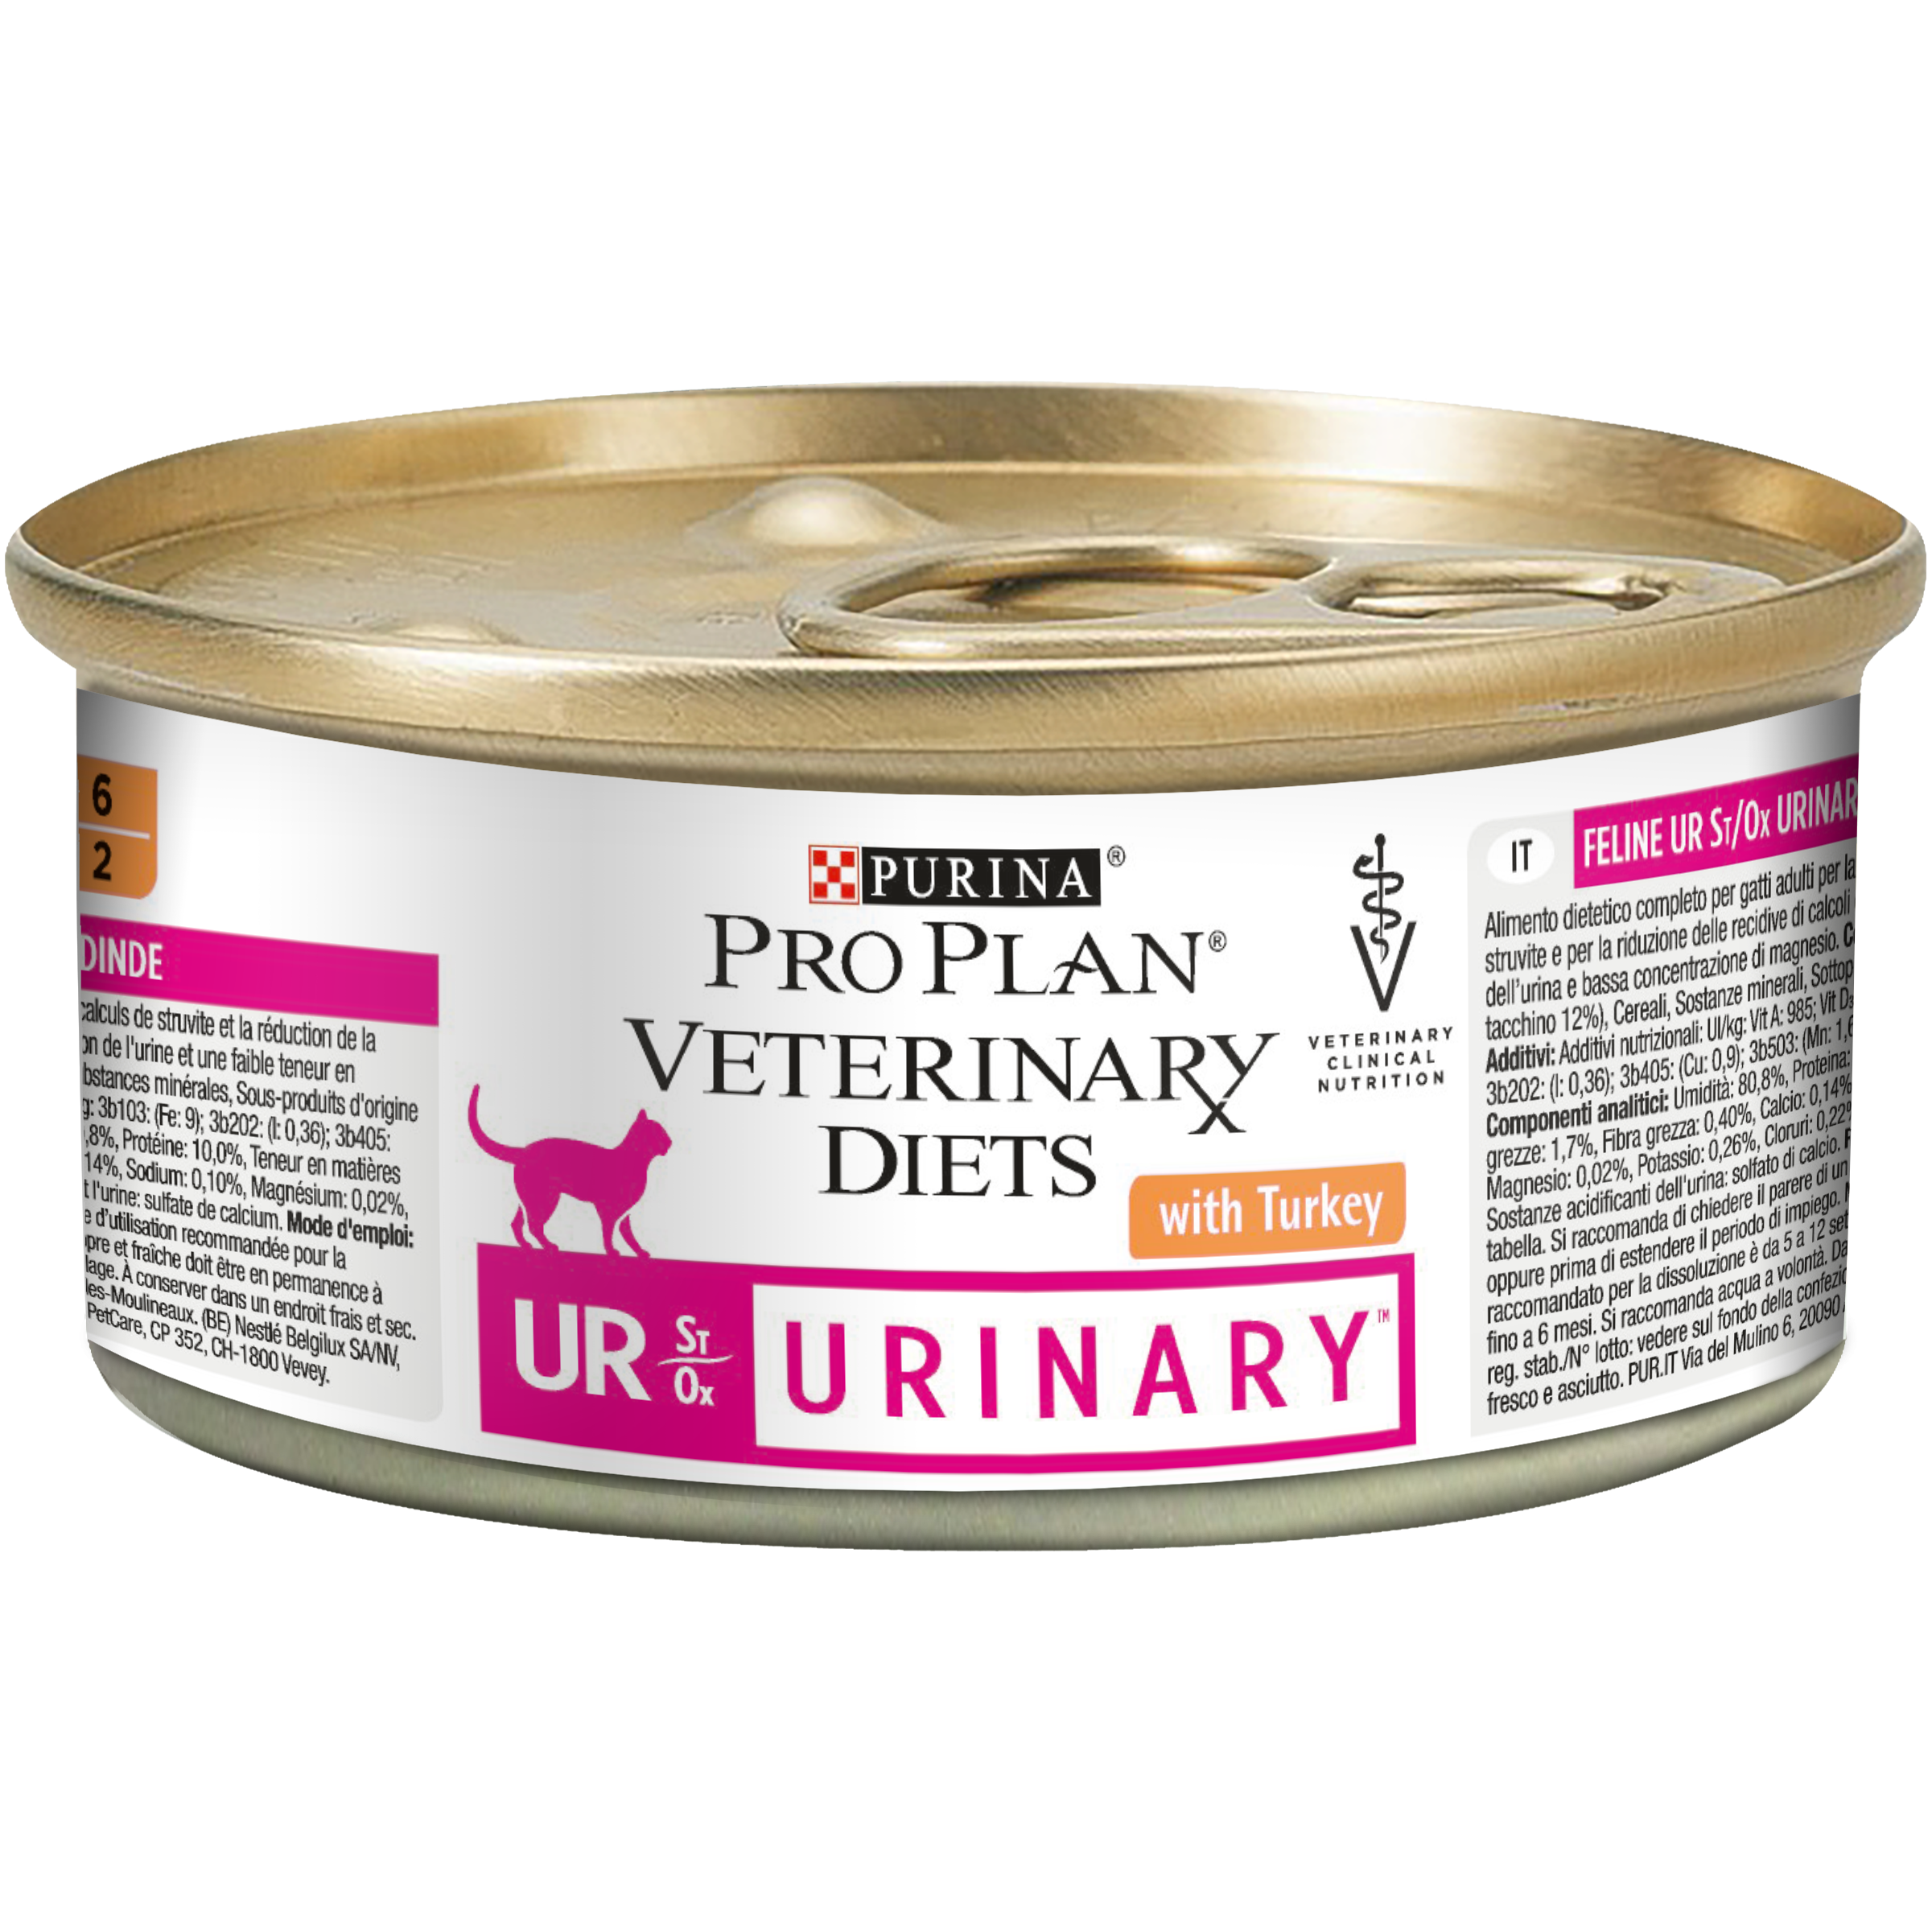 PURINA PRO PLAN VETERINARY DIETS UR Urinary Mousse, 195 g 195